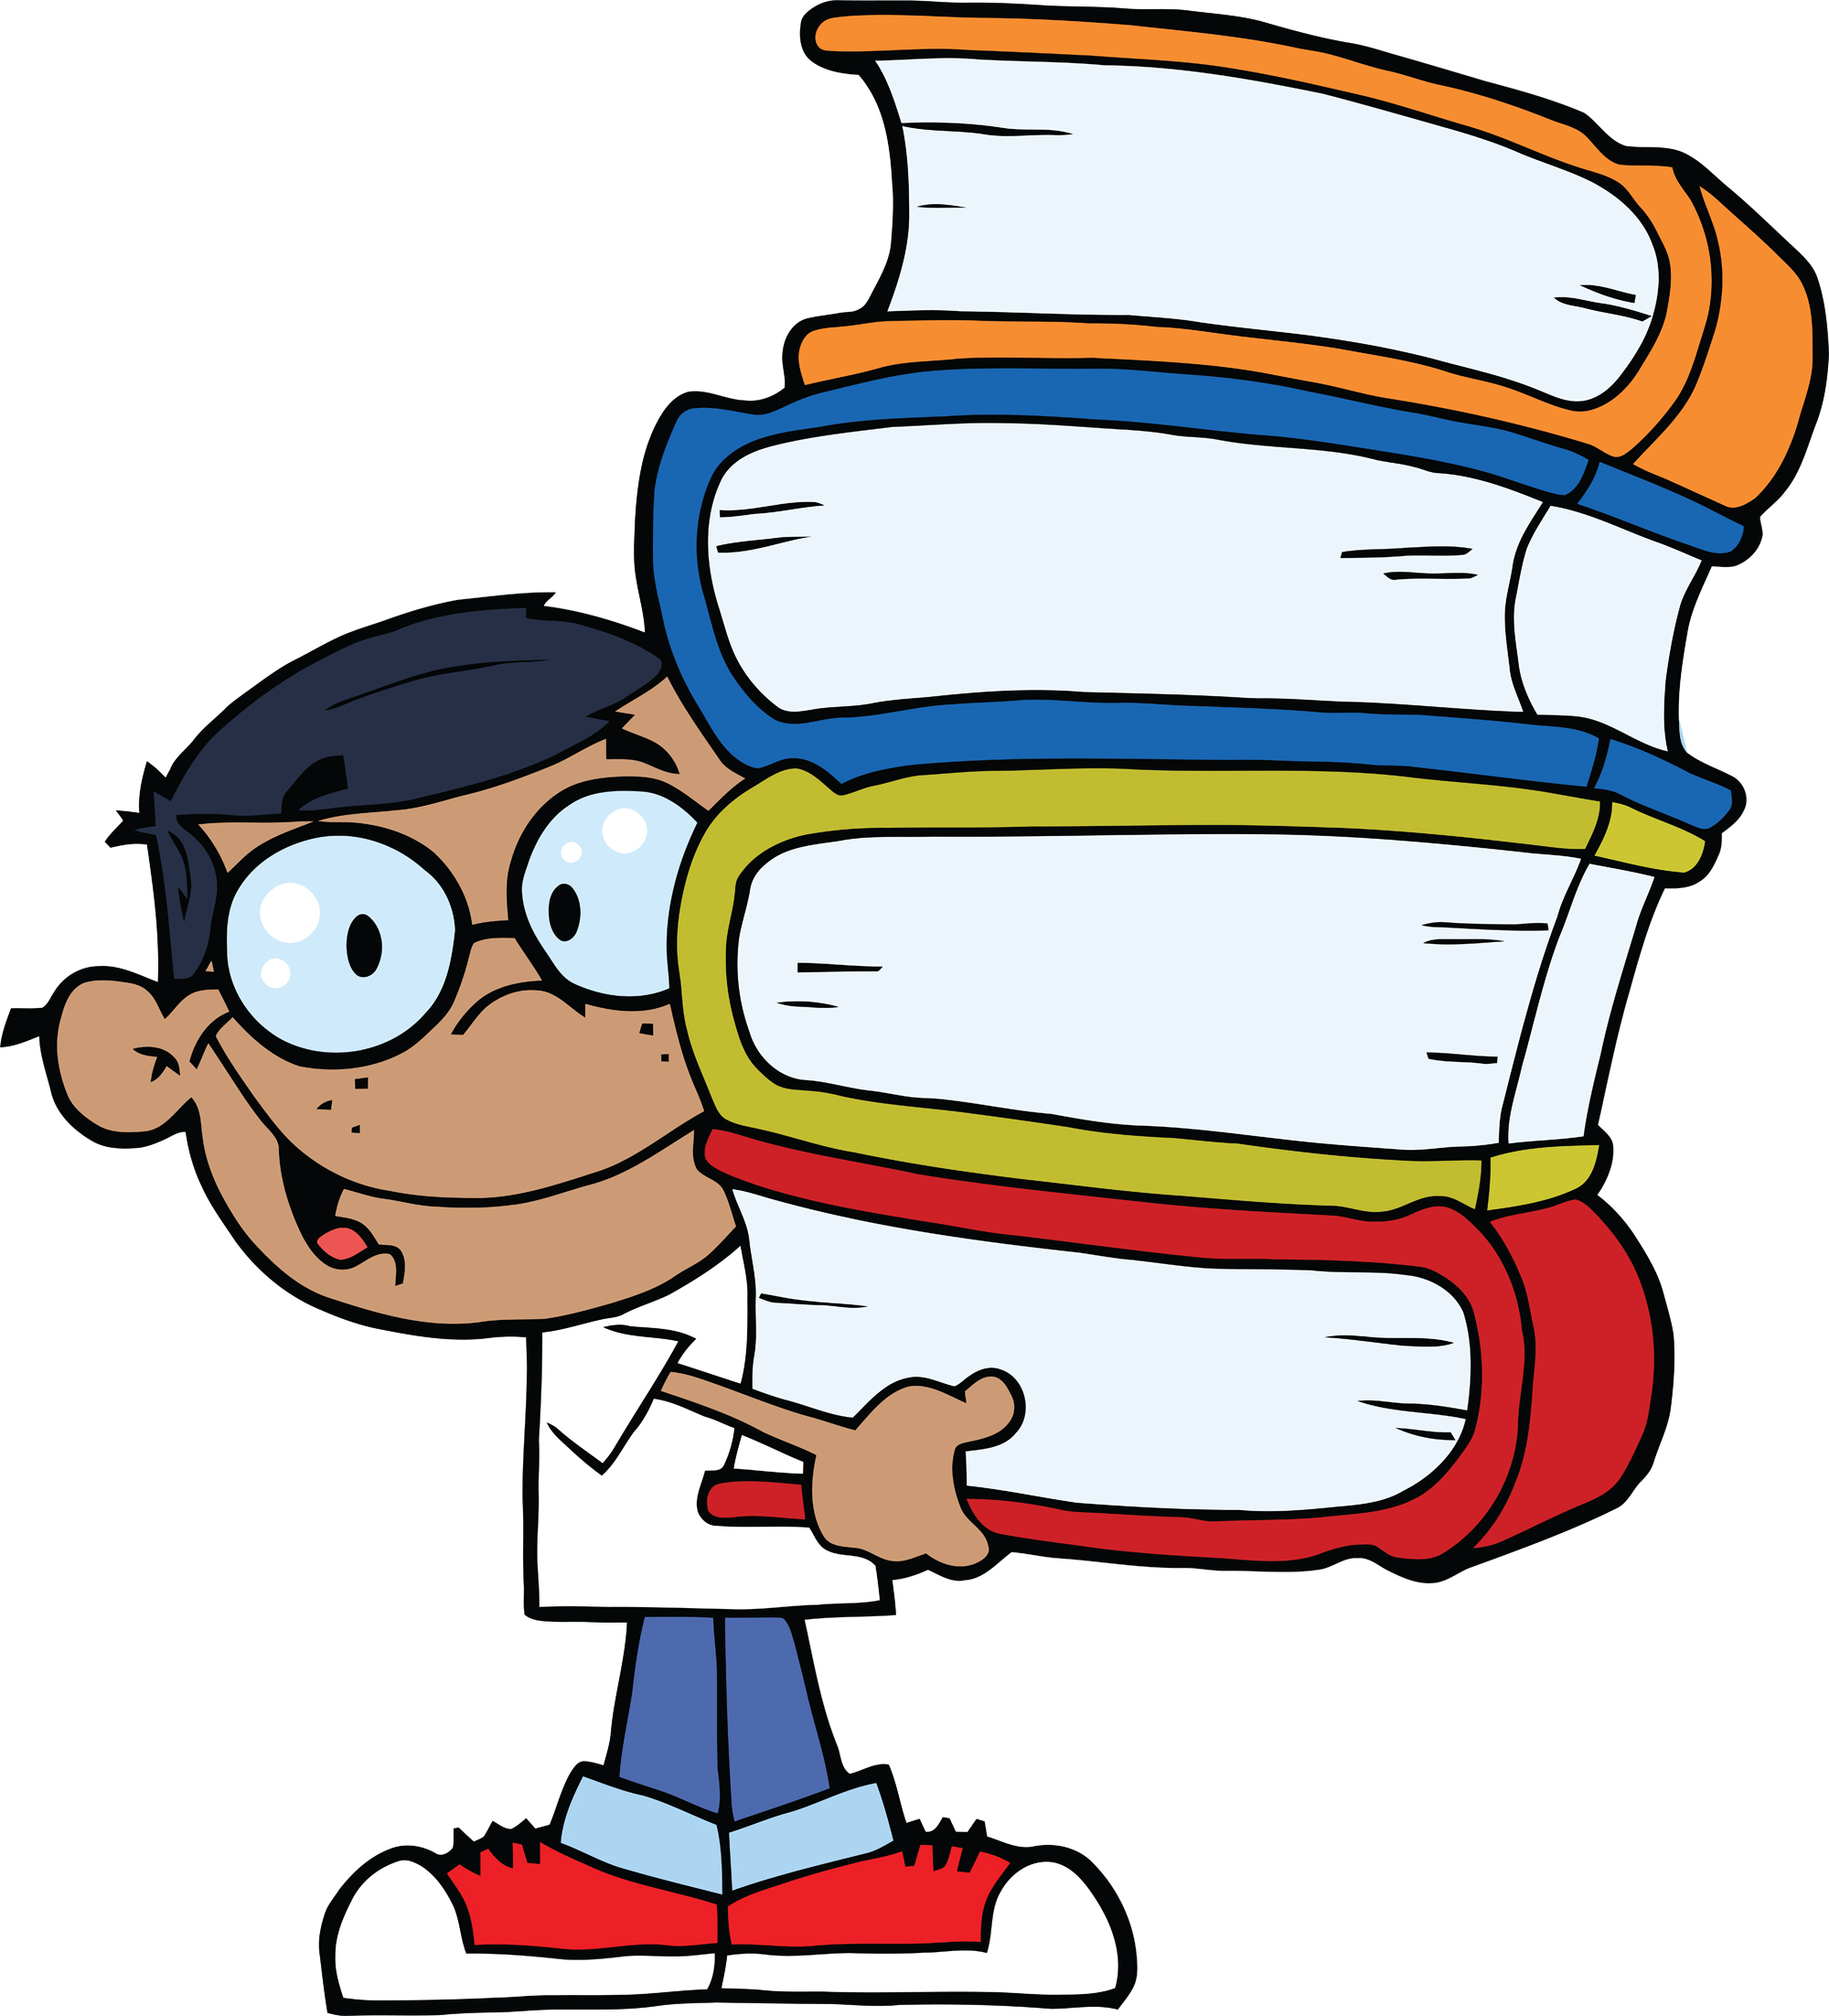 Education clip art pictures free clipart images